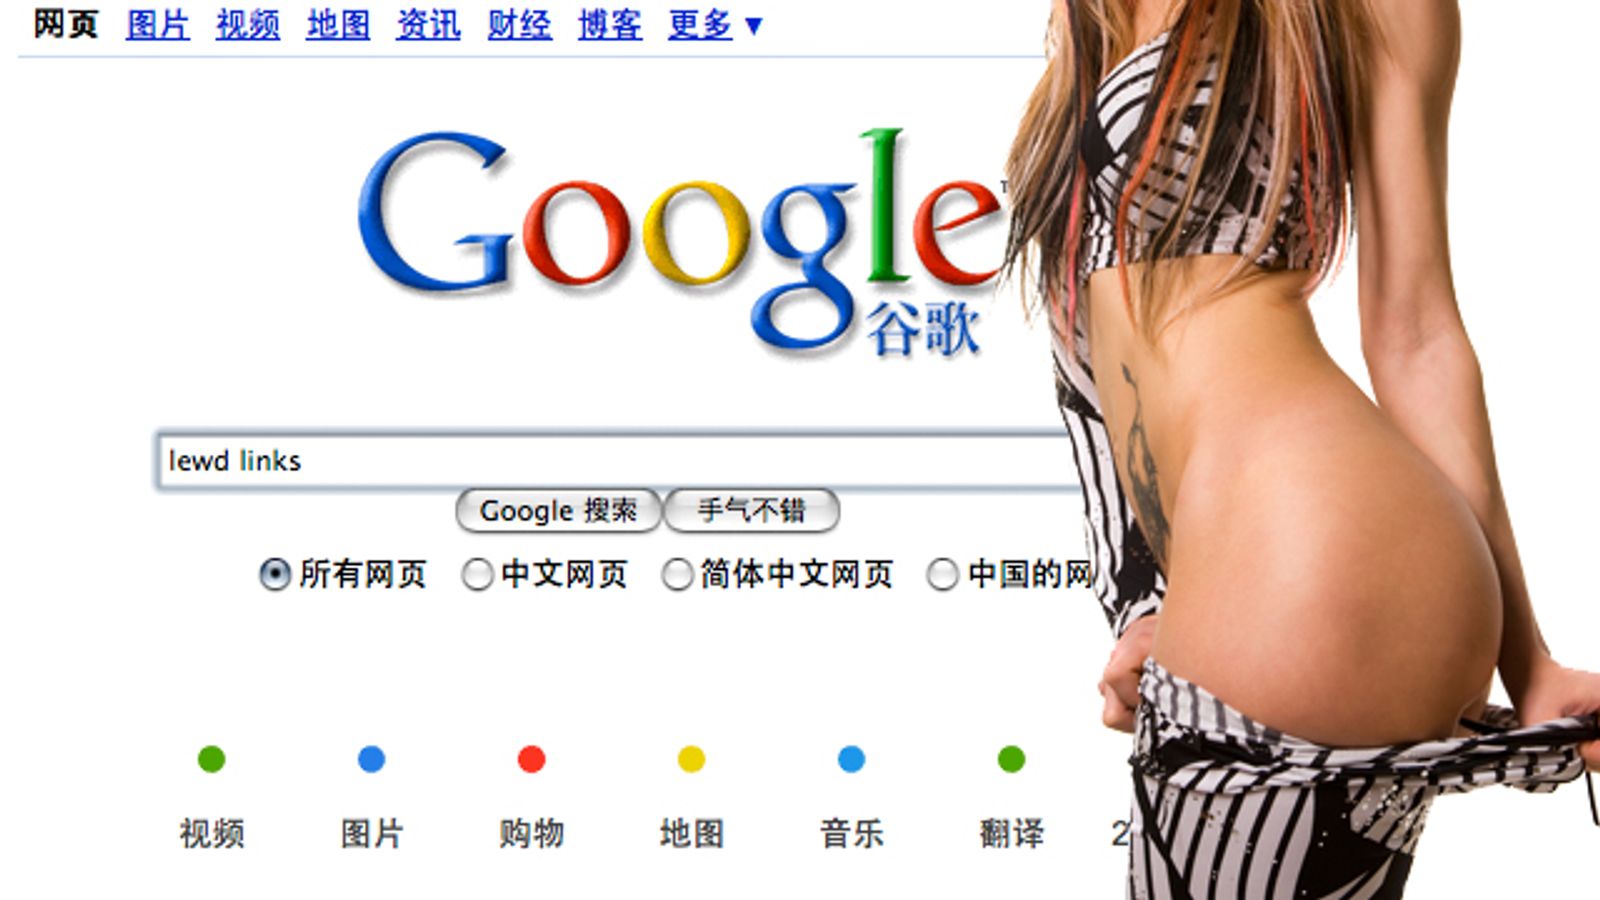 Google Pulling Porn from China Portal